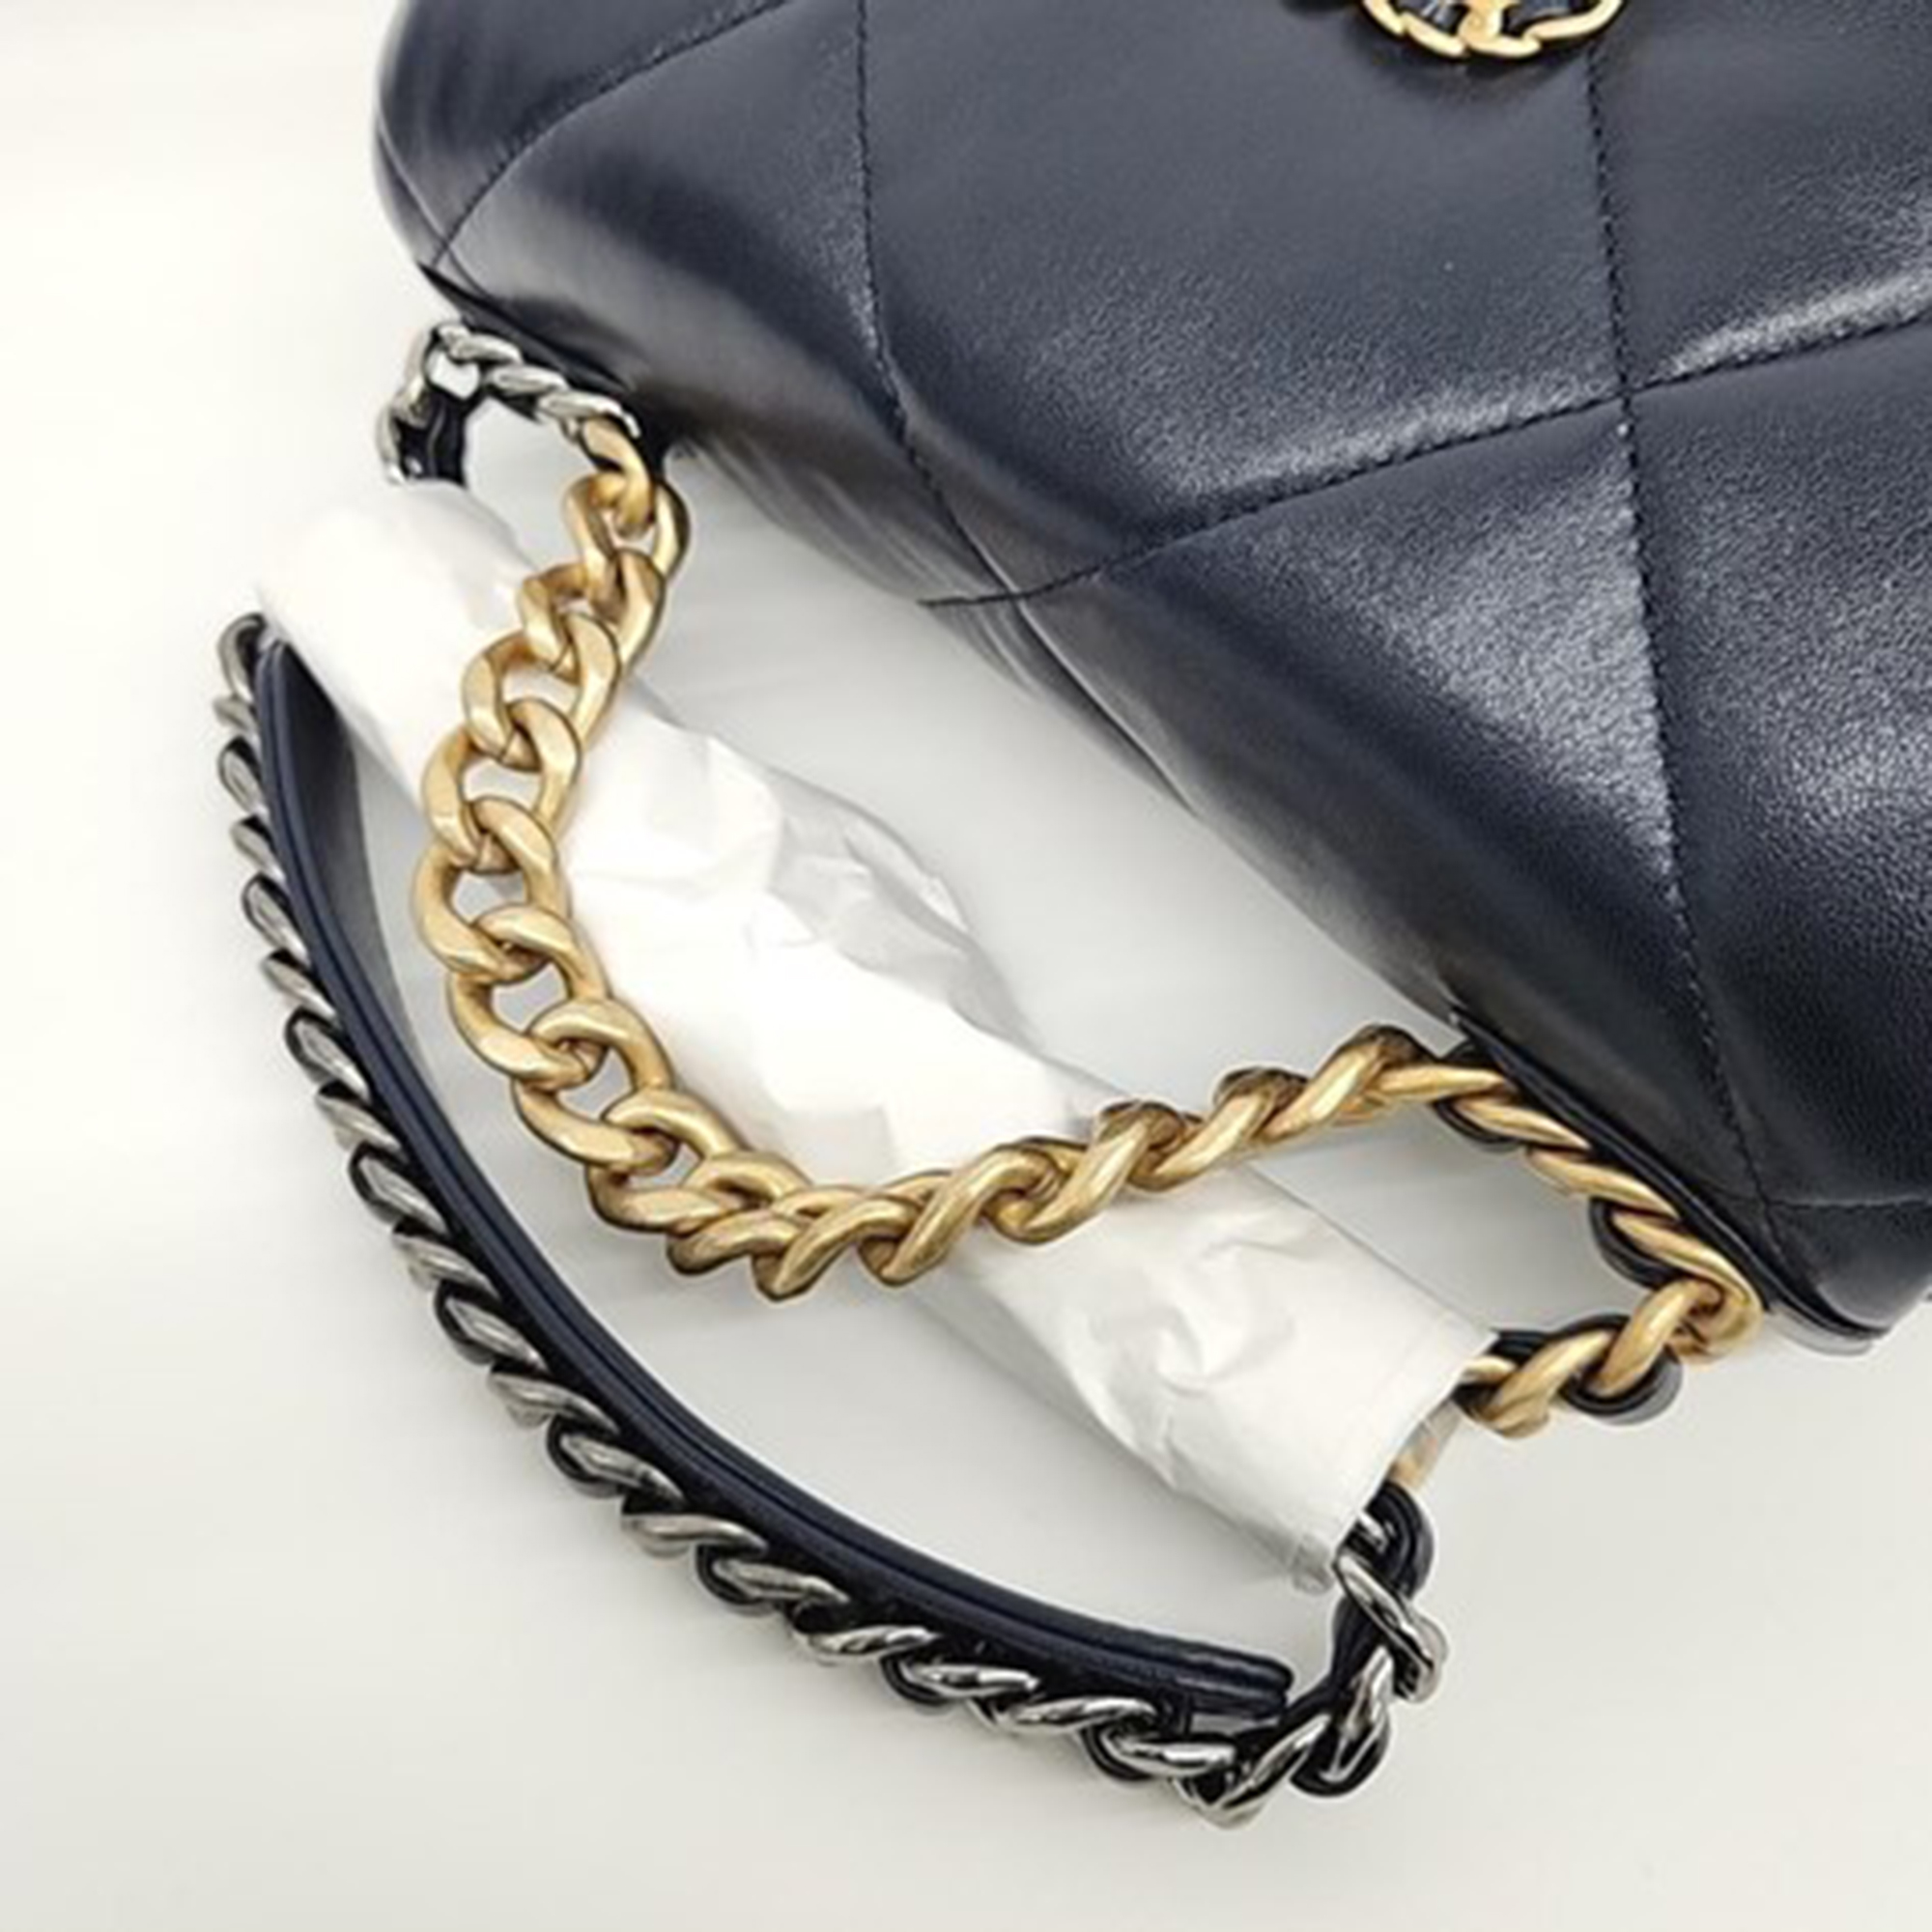 Chanel 19 Black Leather Flap Bag Small